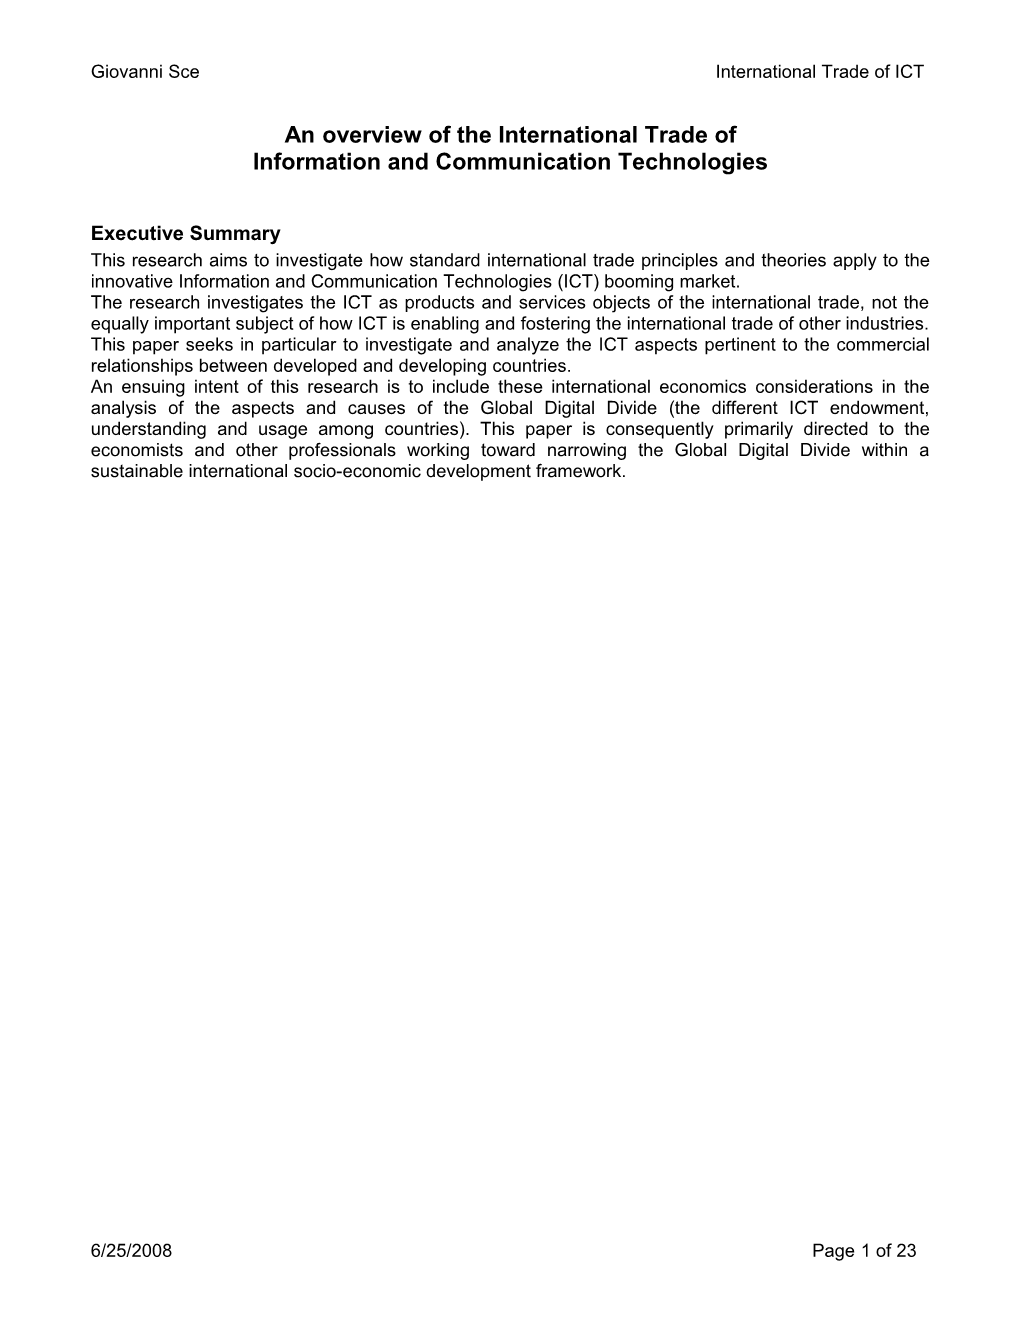 Overview of Information and Communication Technologies in International Trade